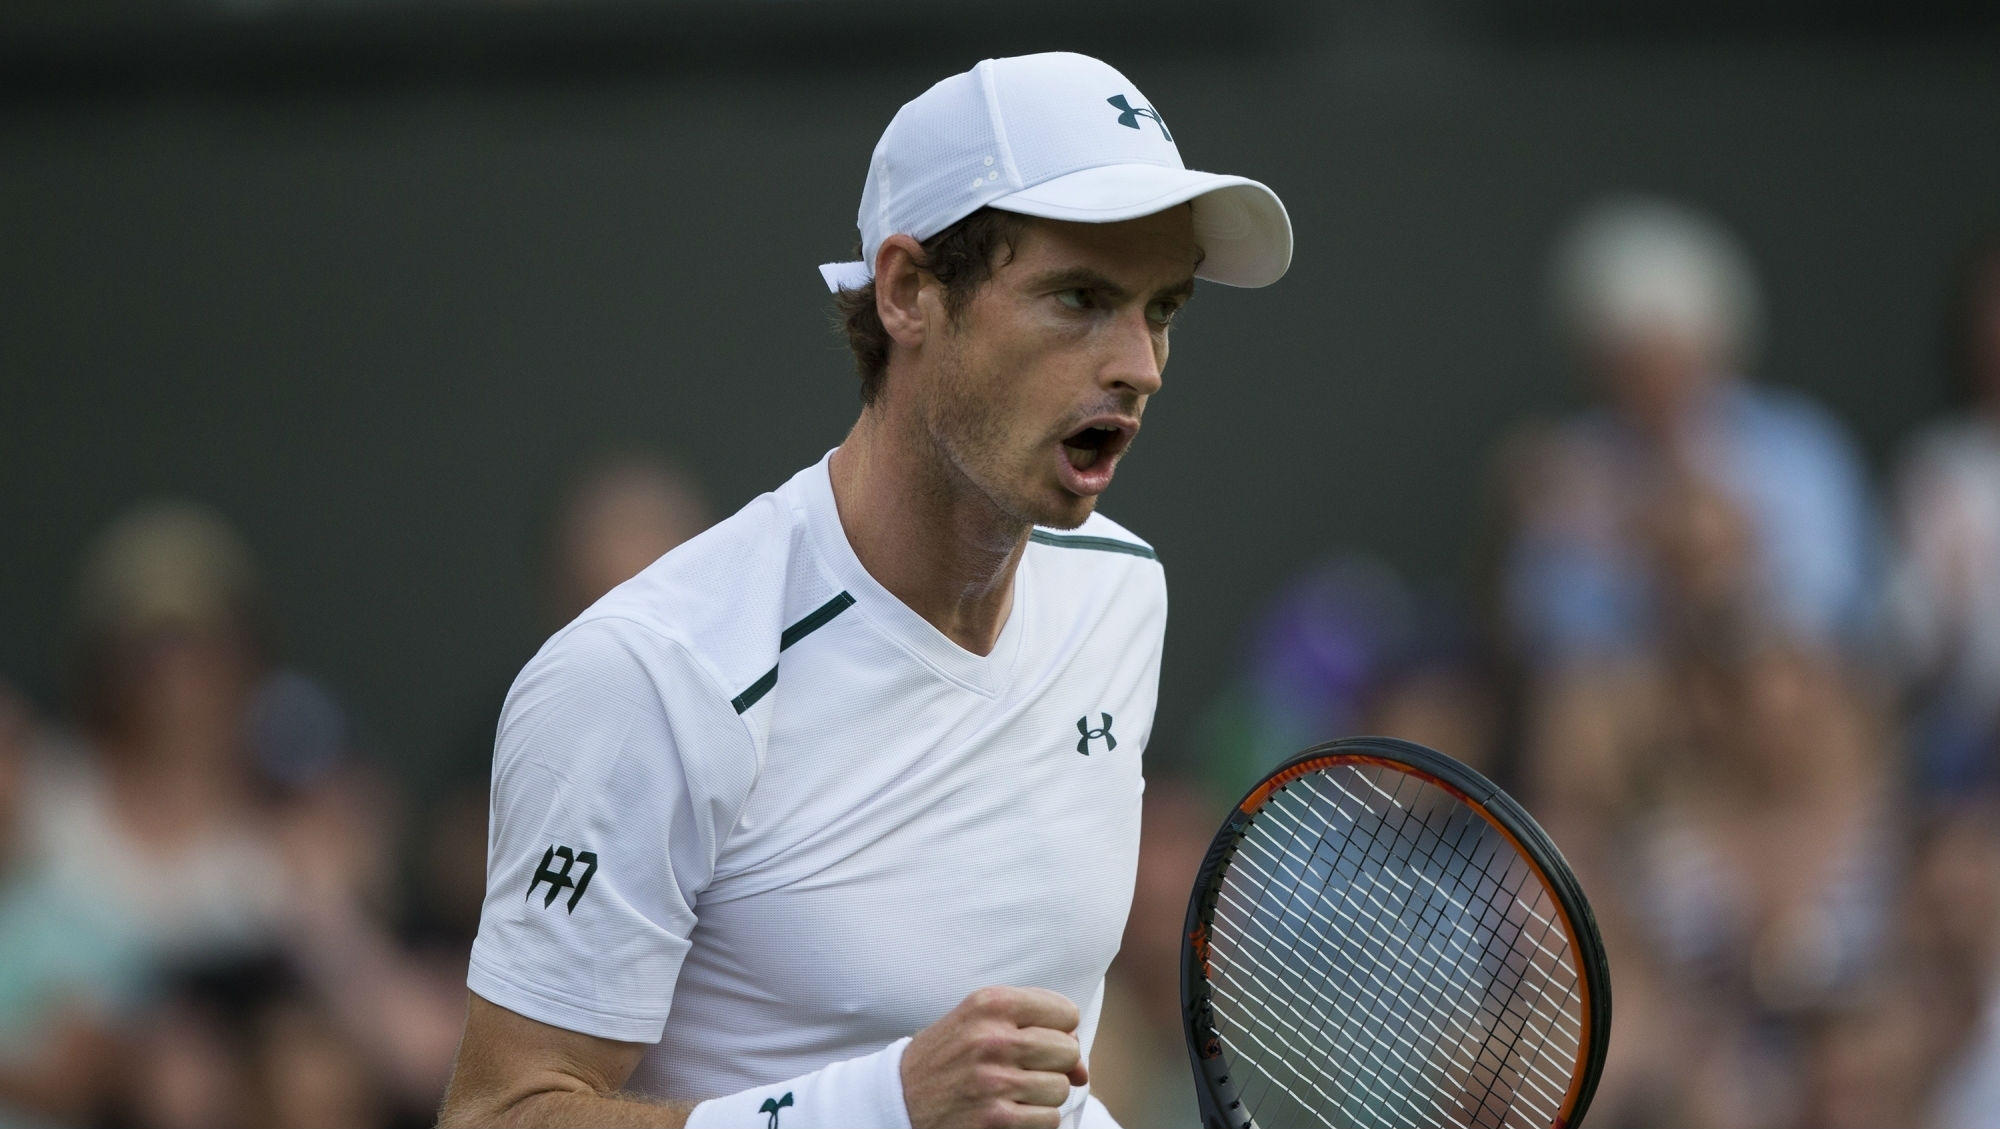 Andy Murray vs Denis Shapovalov, Wimbledon 2021 Live Streaming Online How to Watch Free Live Telecast of Mens Singles Tennis Match in India? 🎾 LatestLY